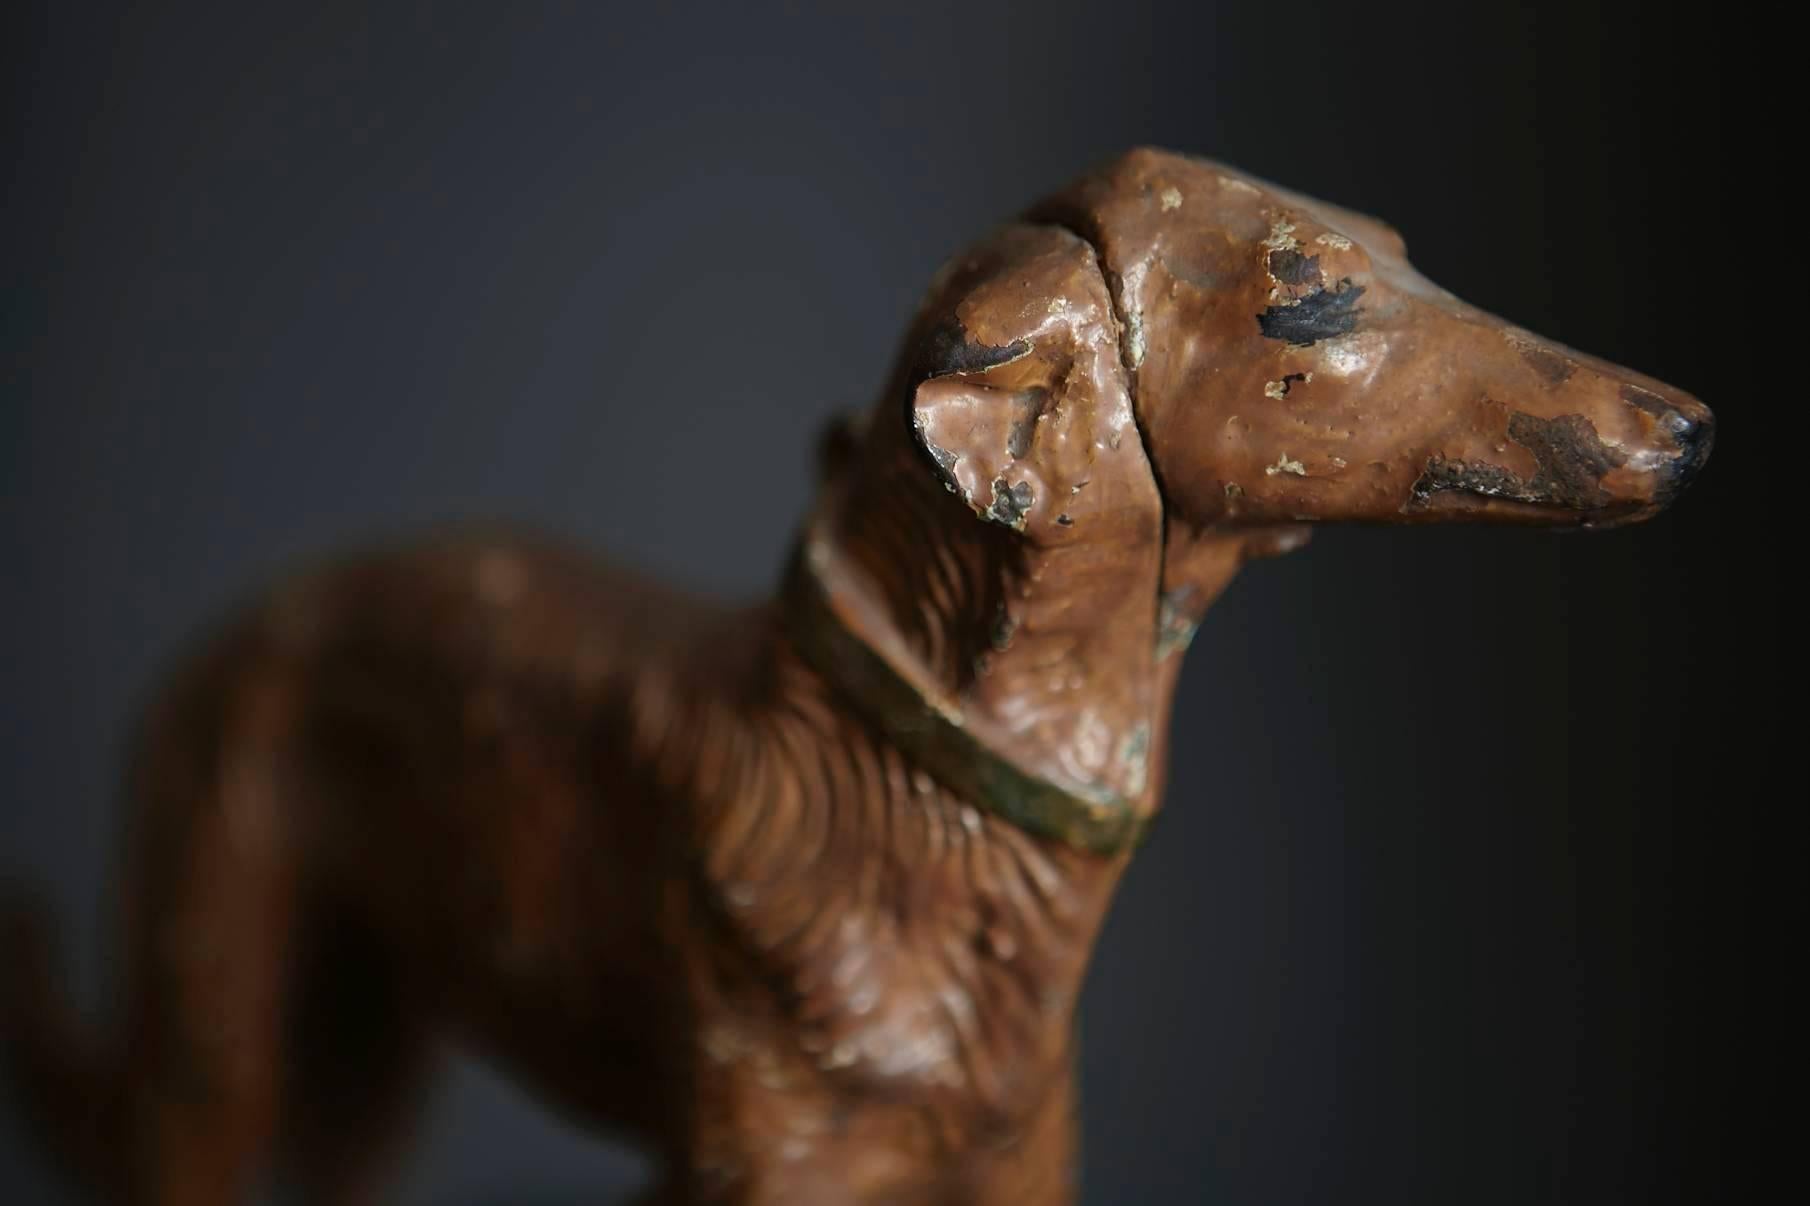 Early 20th Century Art Nouveau Cast Iron Decorative Object or Doorstop Depicting a Hunting Dog